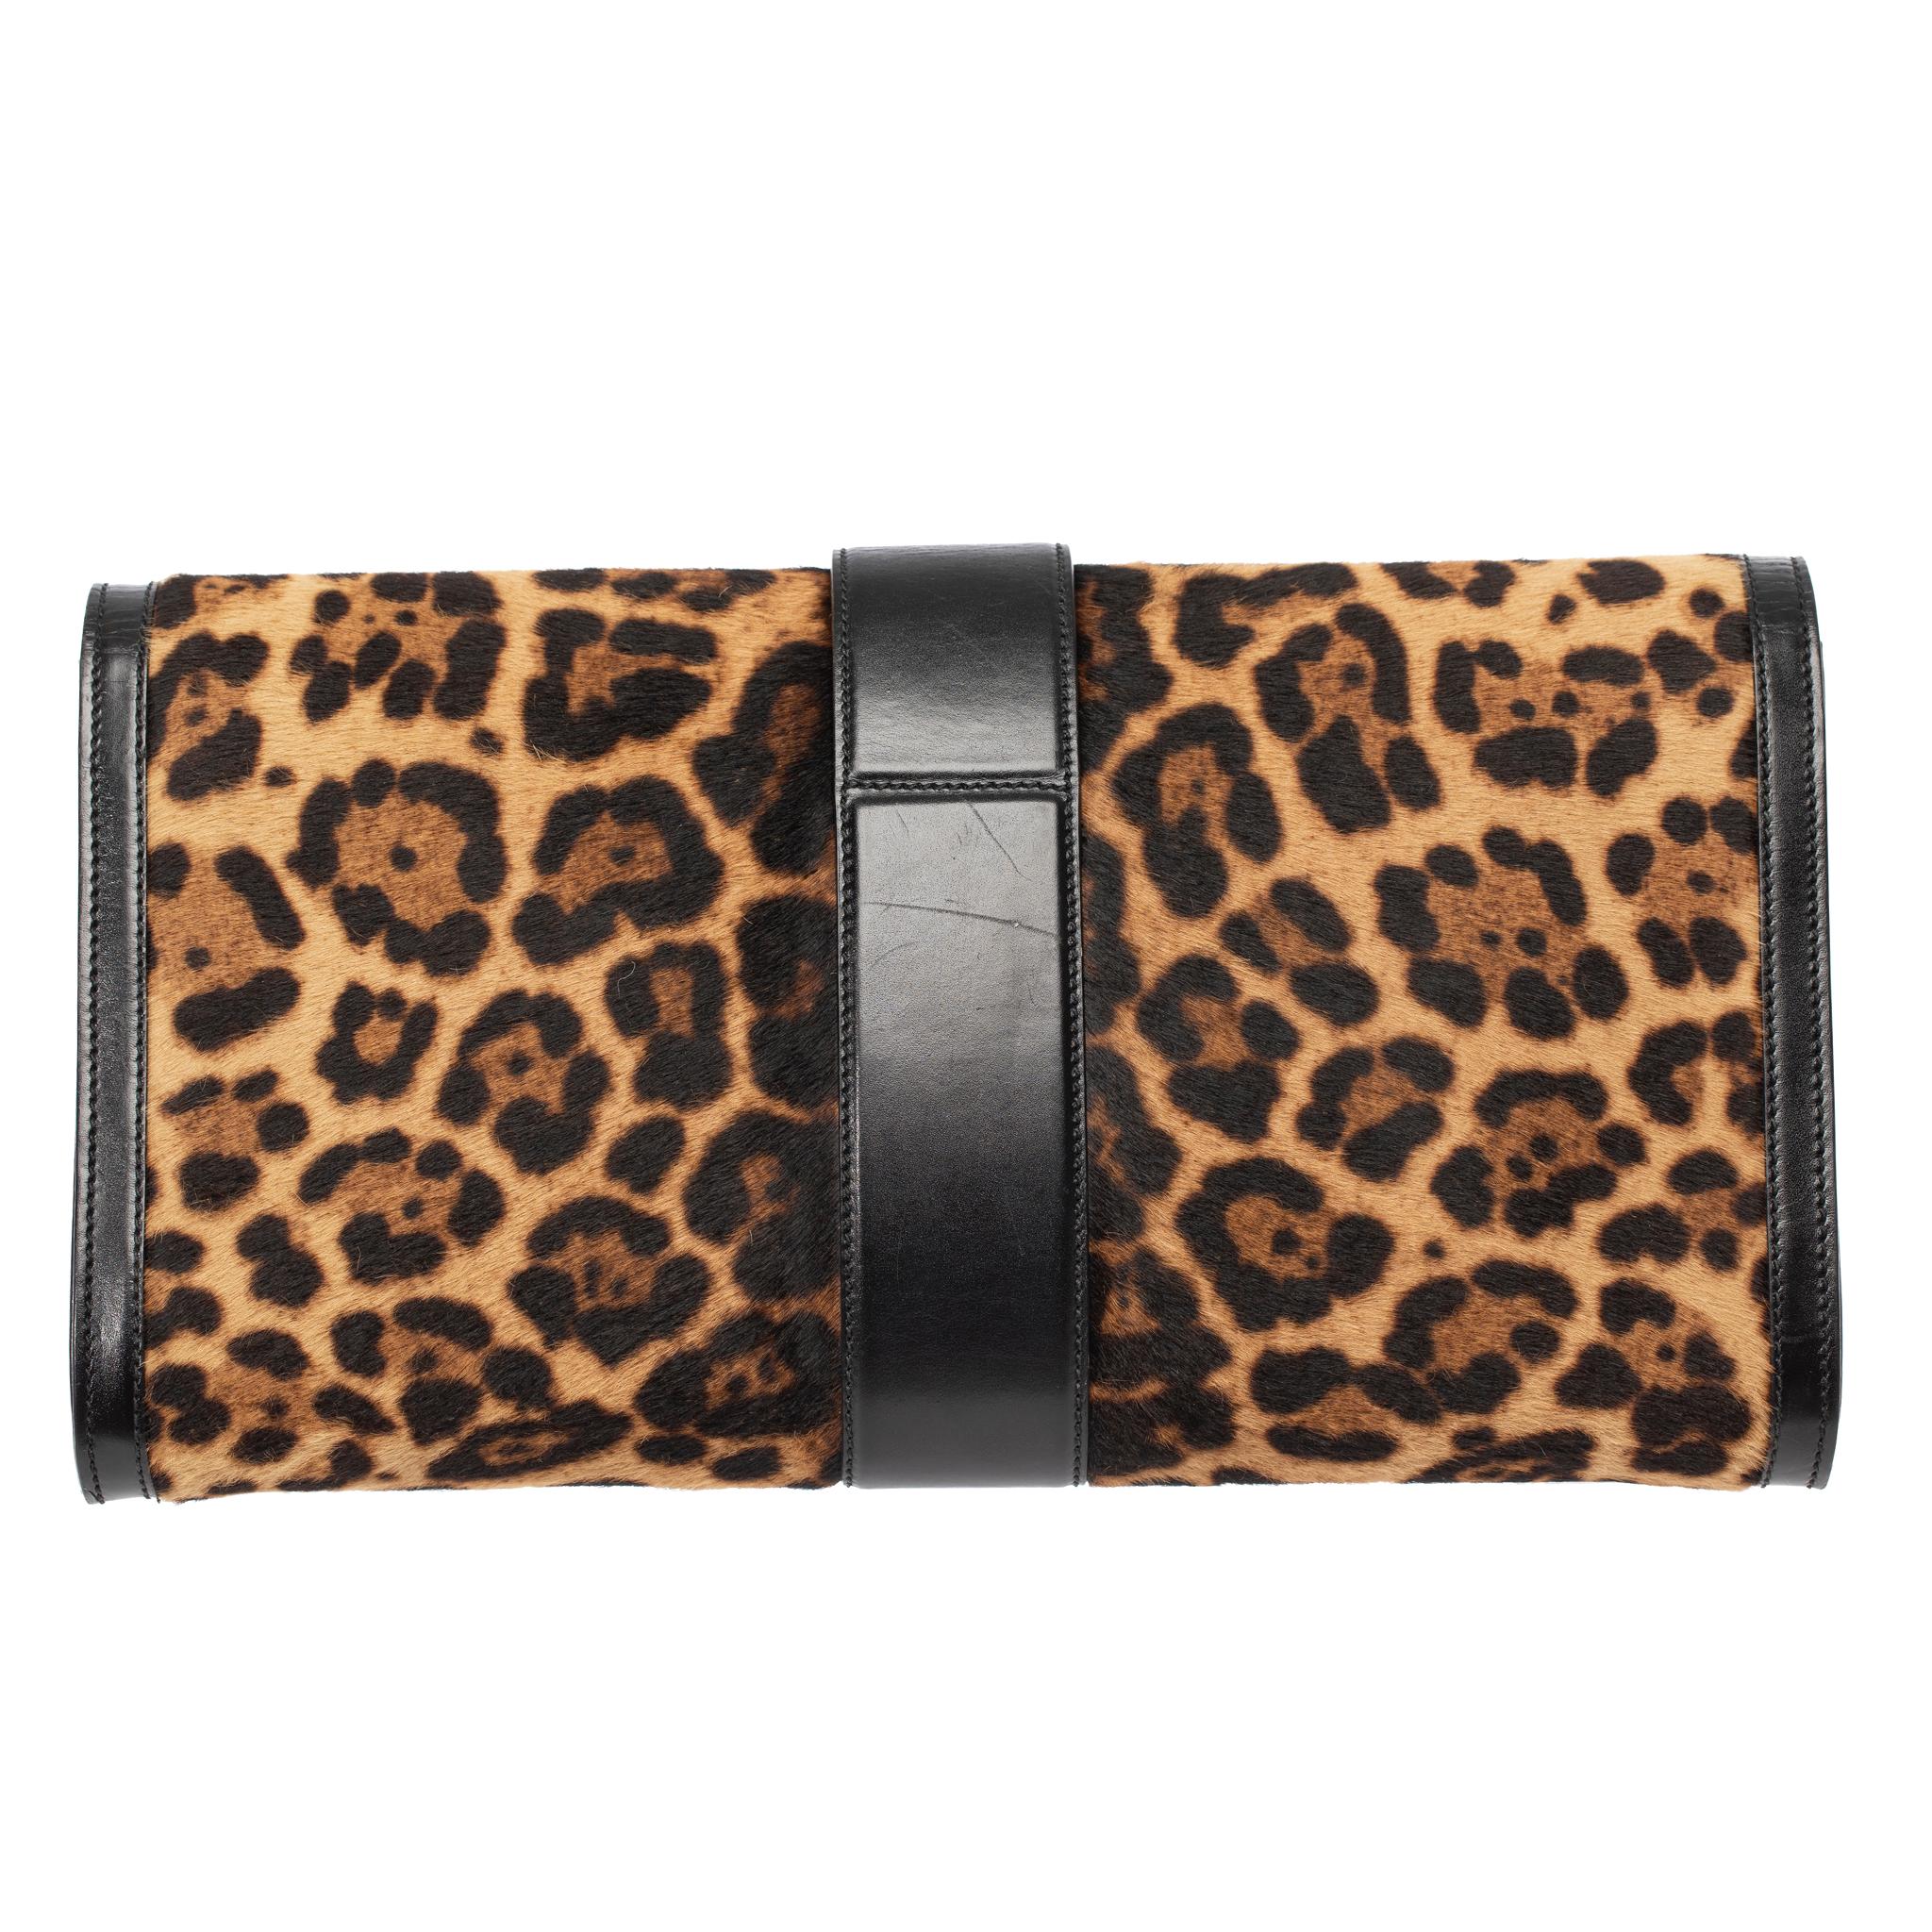 Gucci Clutch With Leopard Print Gold Tone Hardware For Sale 5